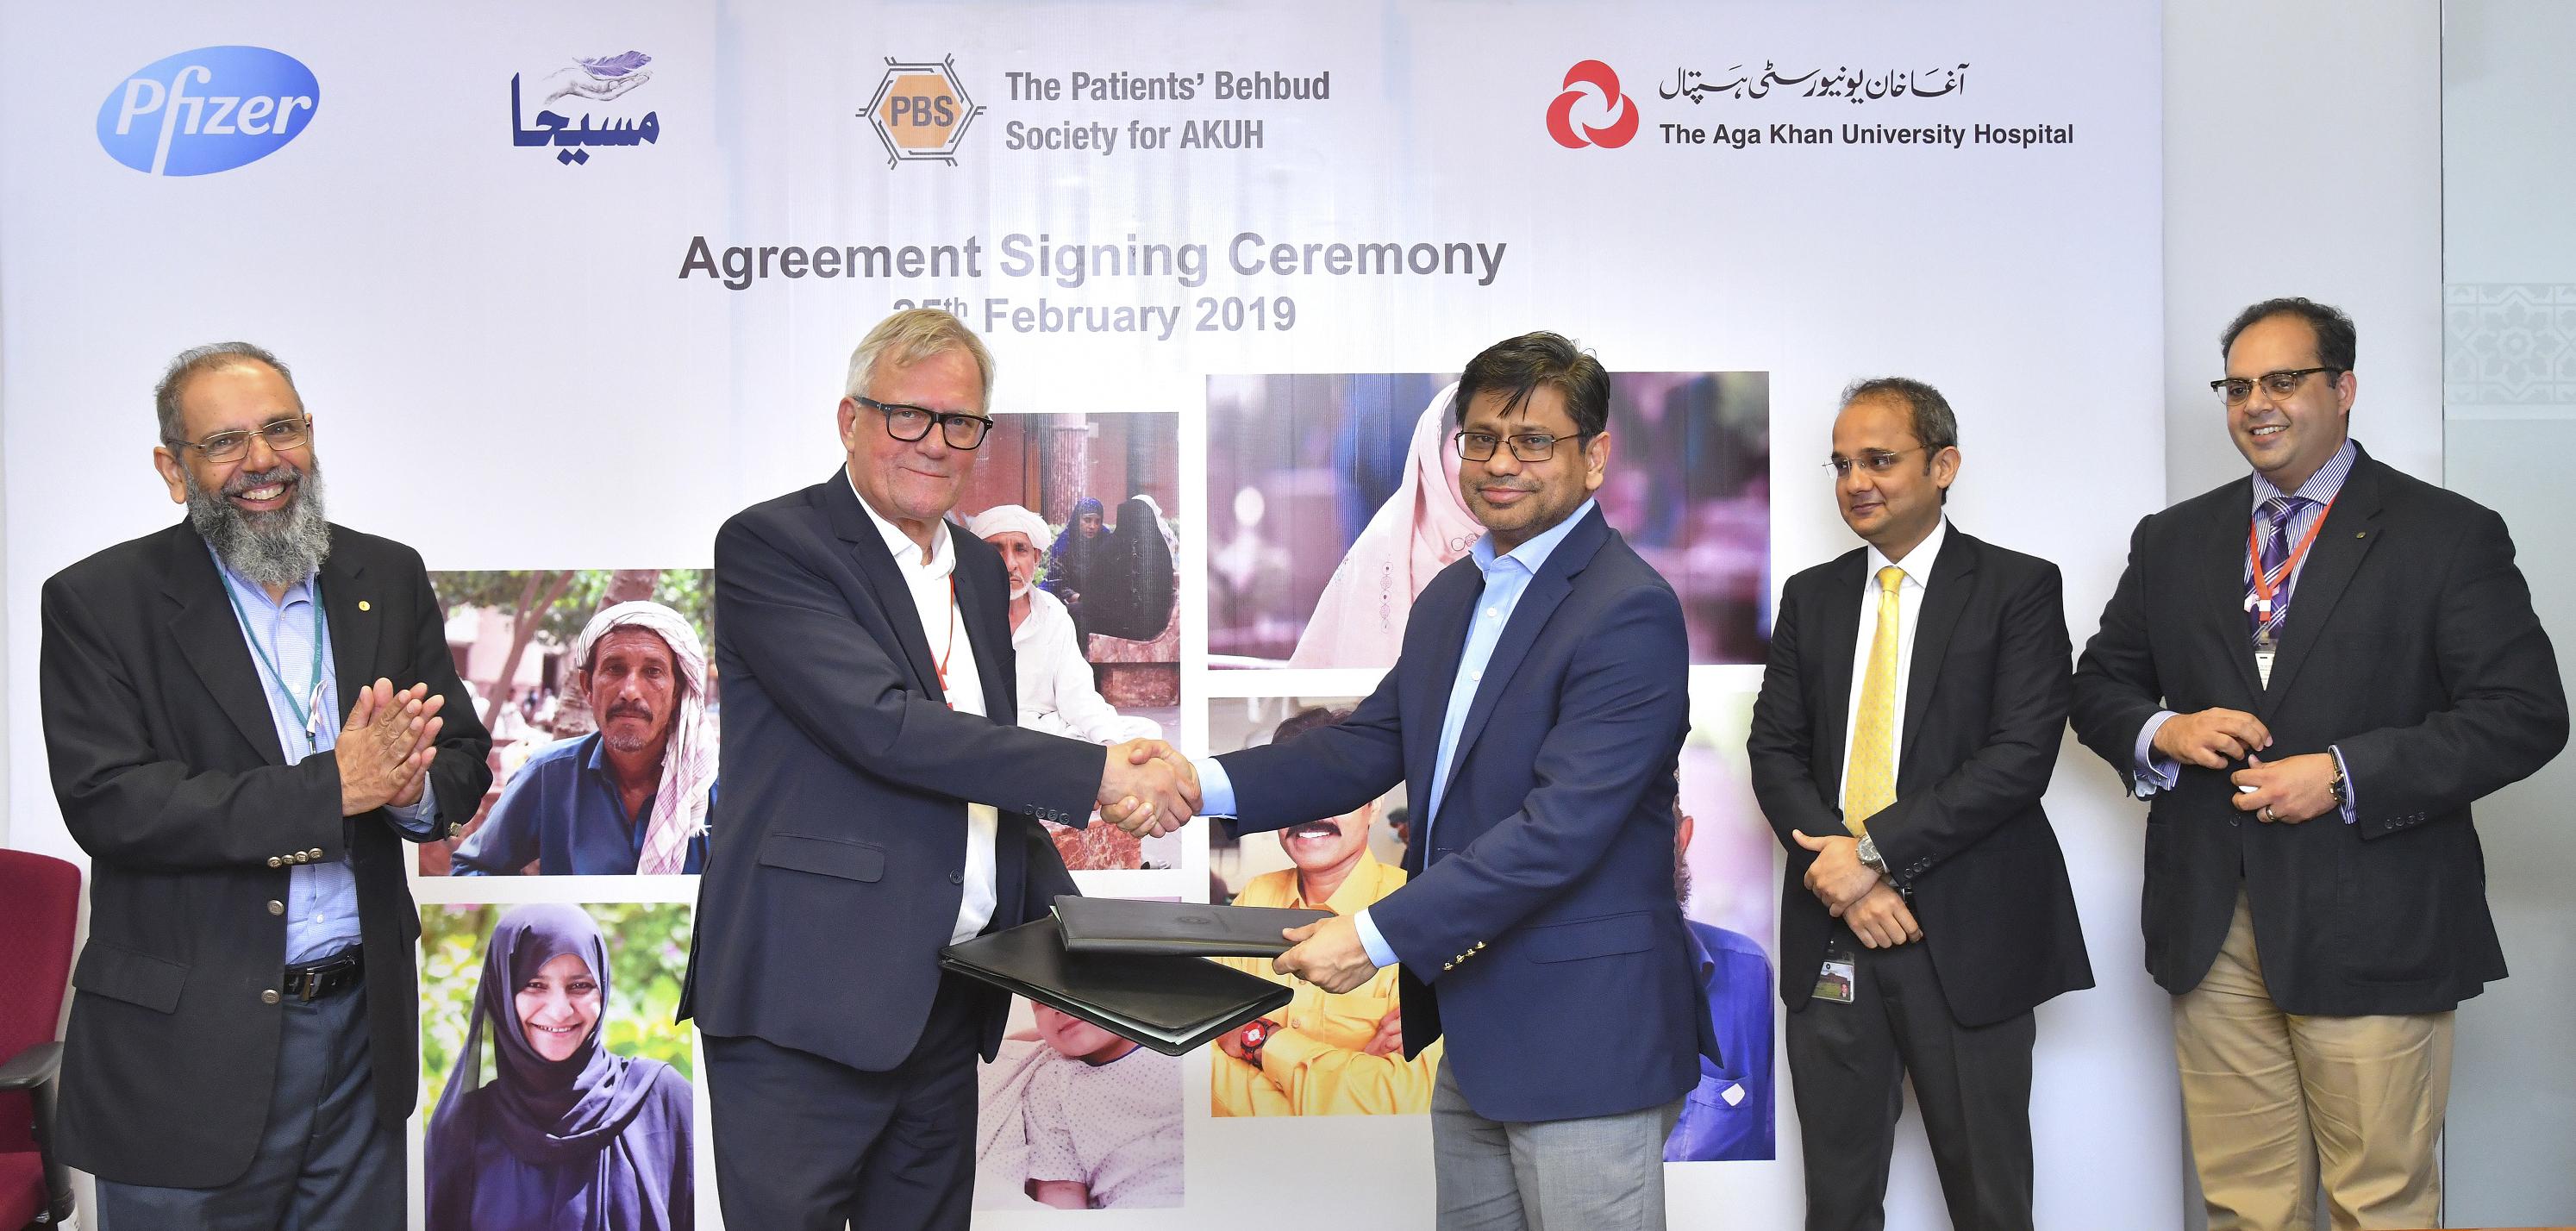 Pfizer Pakistan Limited partners with The Aga Khan University Hospital and The Patient Behbud Society for AKUH to supportneedy CancerPatients through Access Program